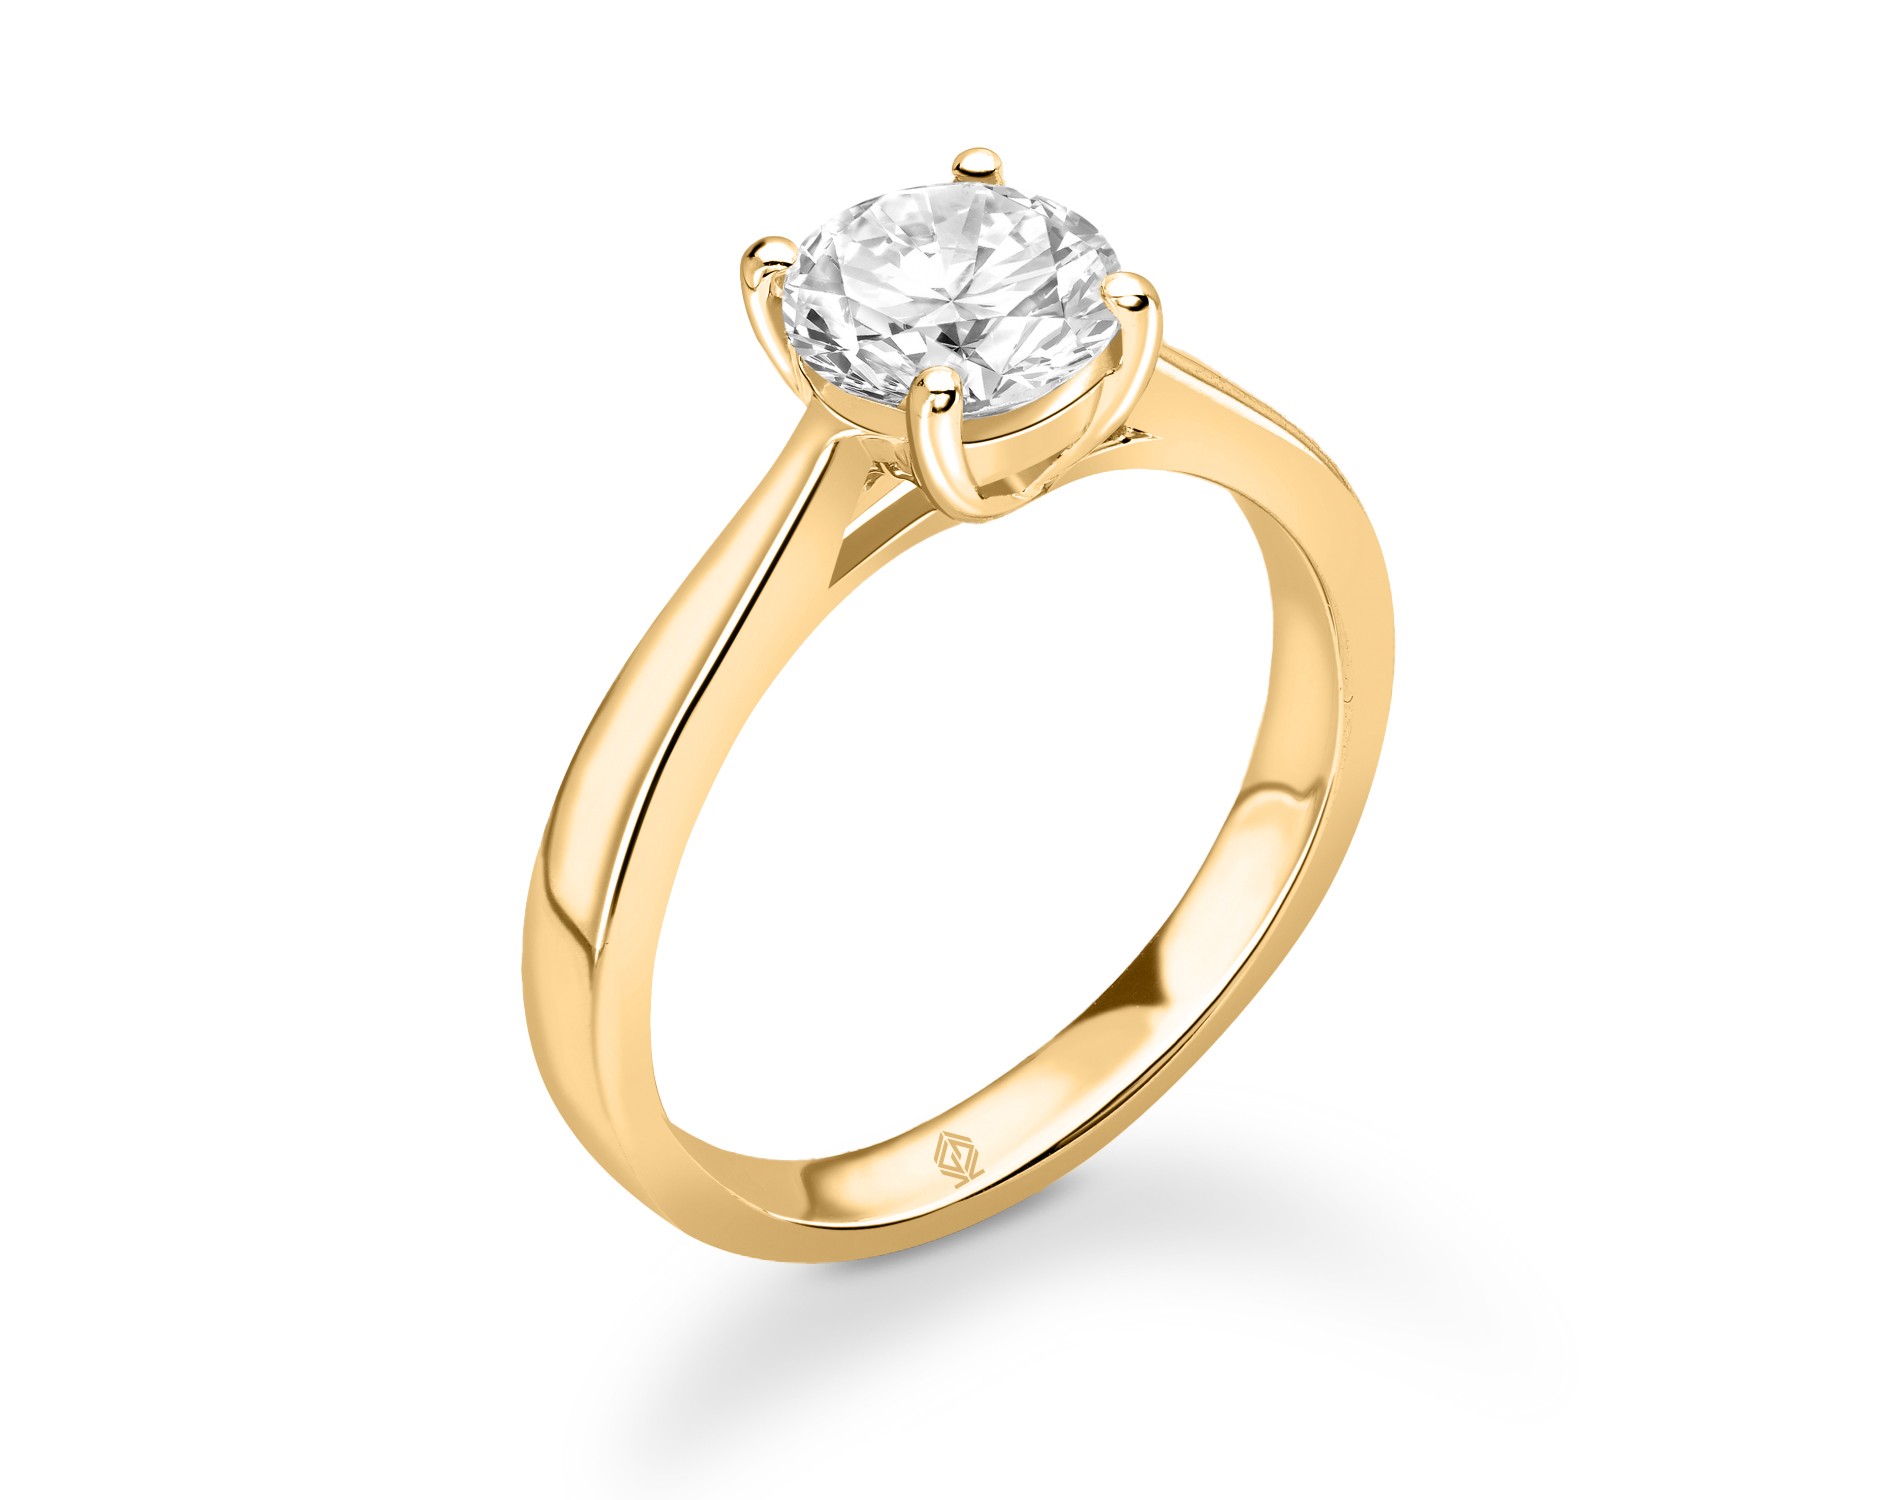 18K YELLOW GOLD 4 PRONGS SOLITAIRE ROUND CUT DIAMOND WITH PLATINUM SHANK ENGAGEMENT RING